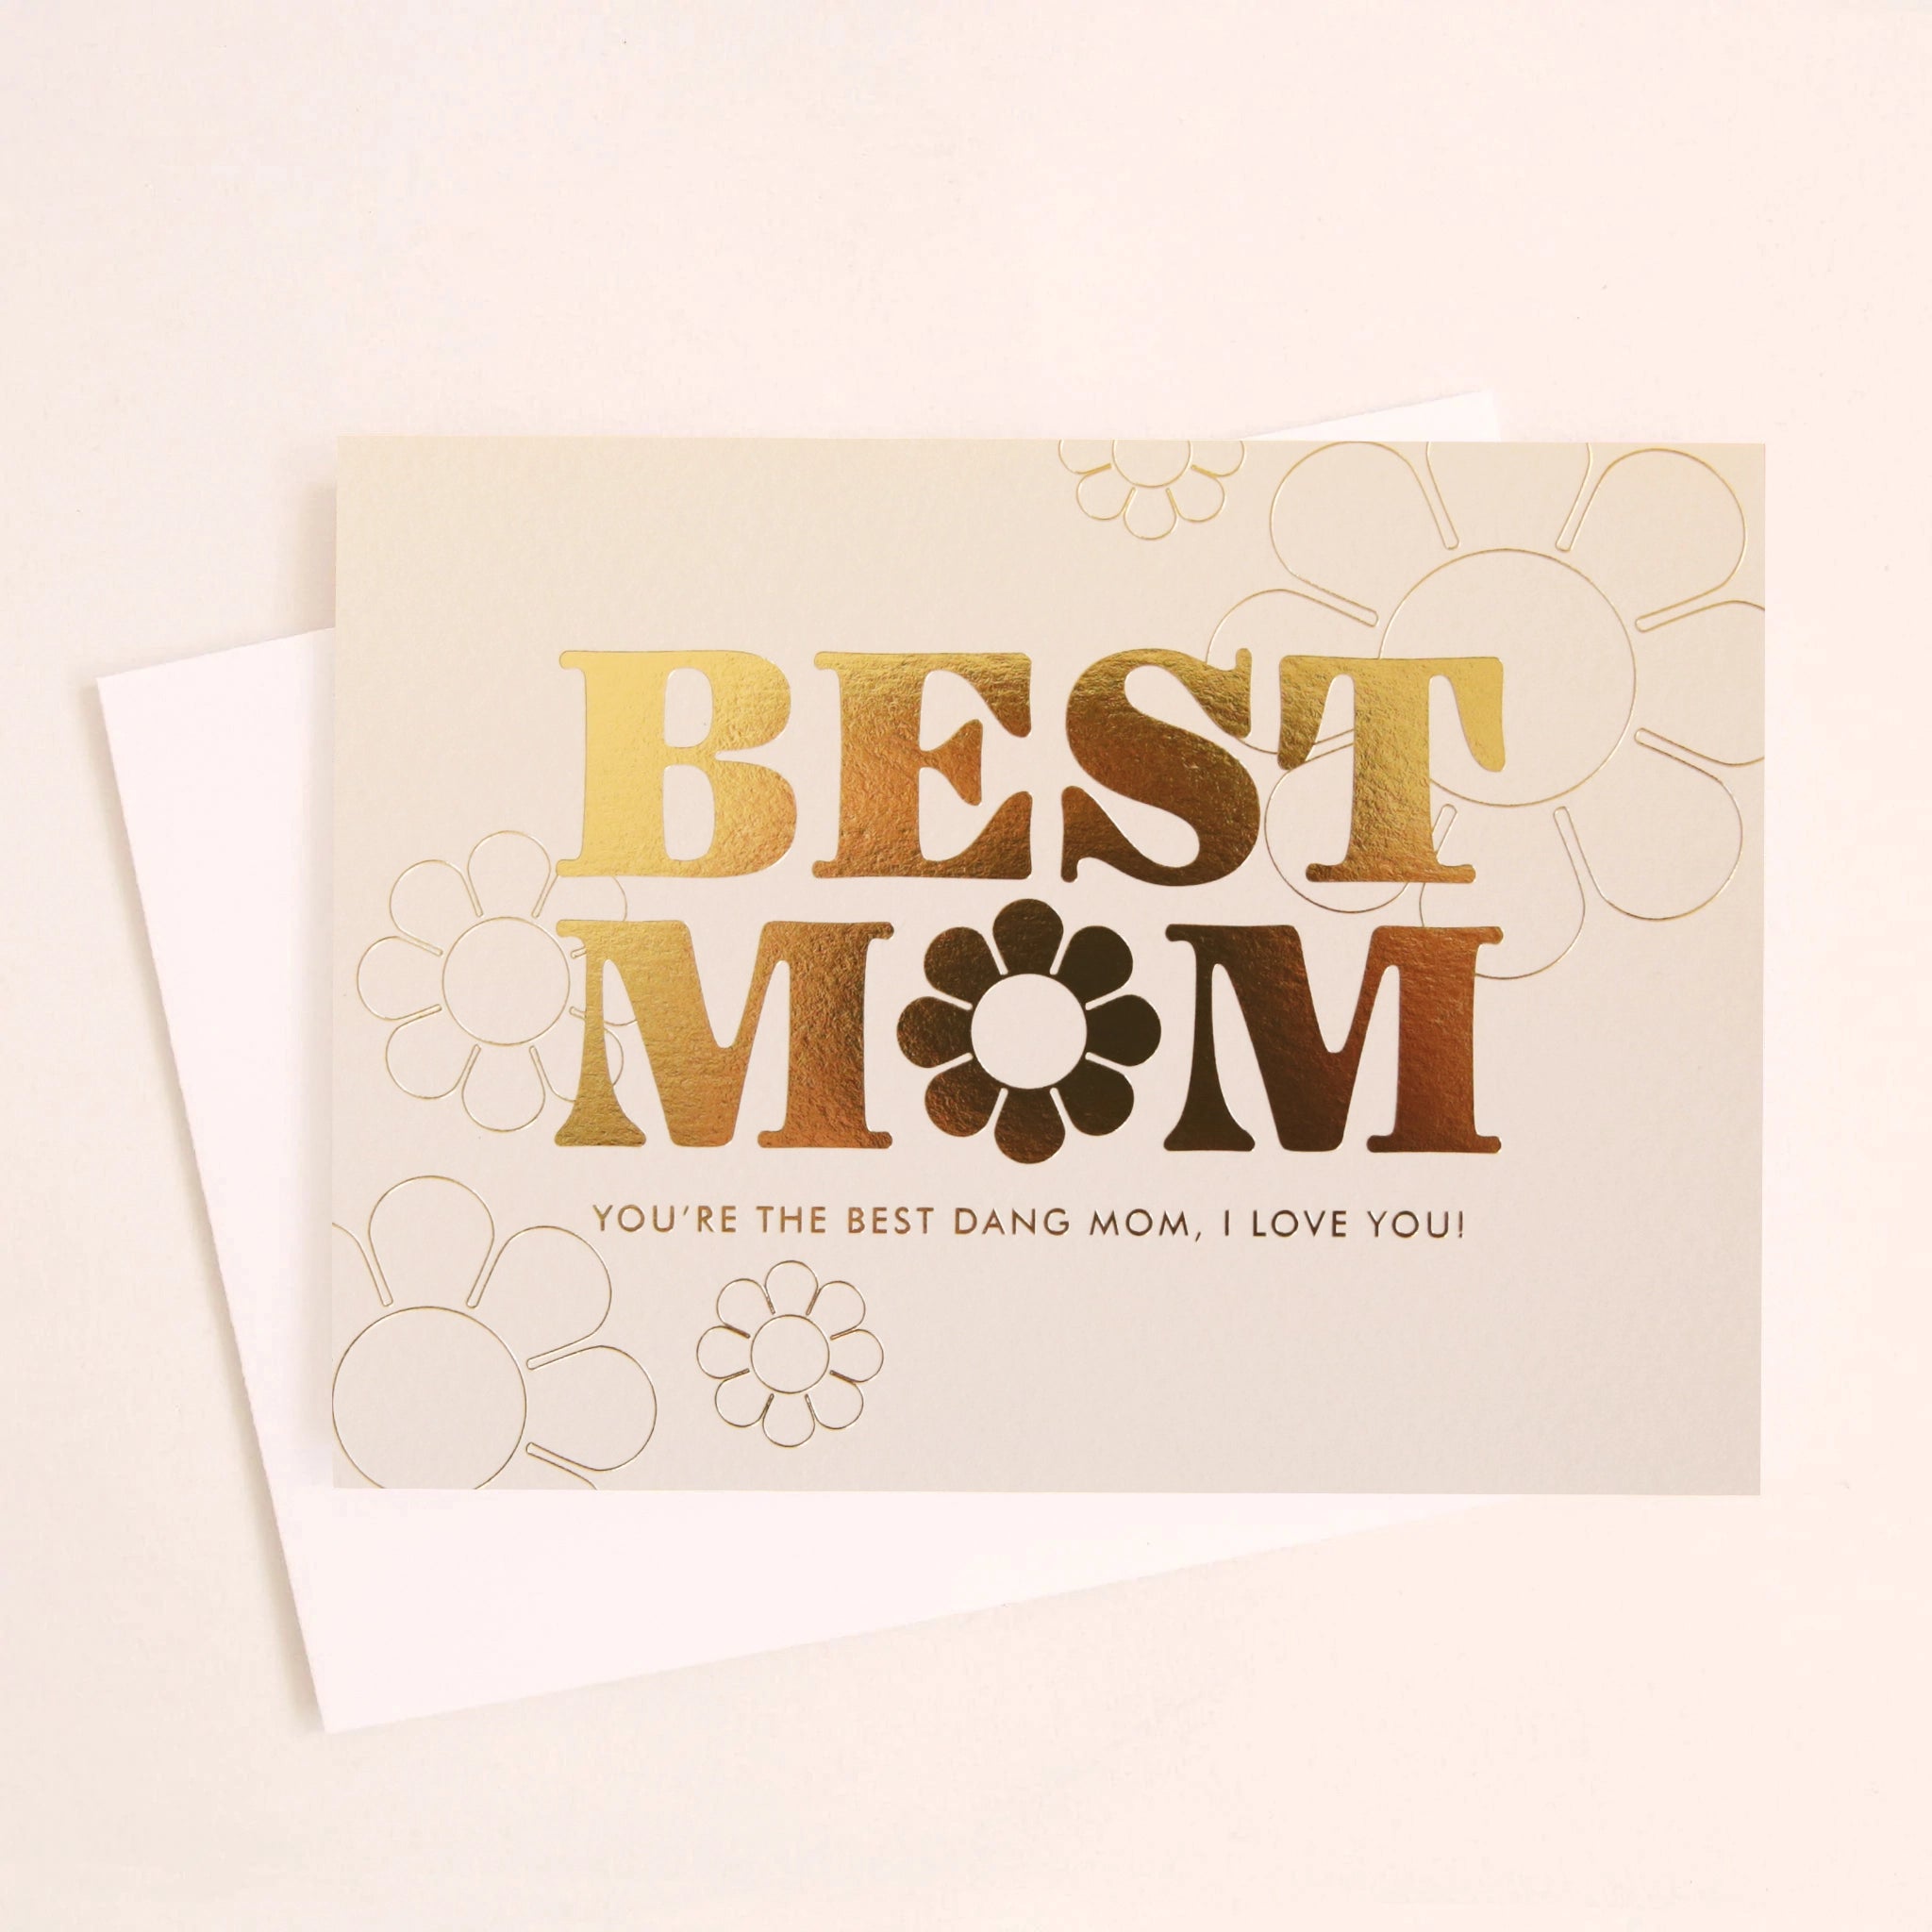 A cream colored card with gold foil lettering that reads, &quot;Best Mom, You&#39;re The Best Dang Mom, I Love You!&quot;. The &#39;o&#39; in &#39;Mom&#39; is a daisy. There are thin gold outlines of daisies in the top right corner and the bottom left. The card is photographed with a coordinating white envelope that is included with purchase.